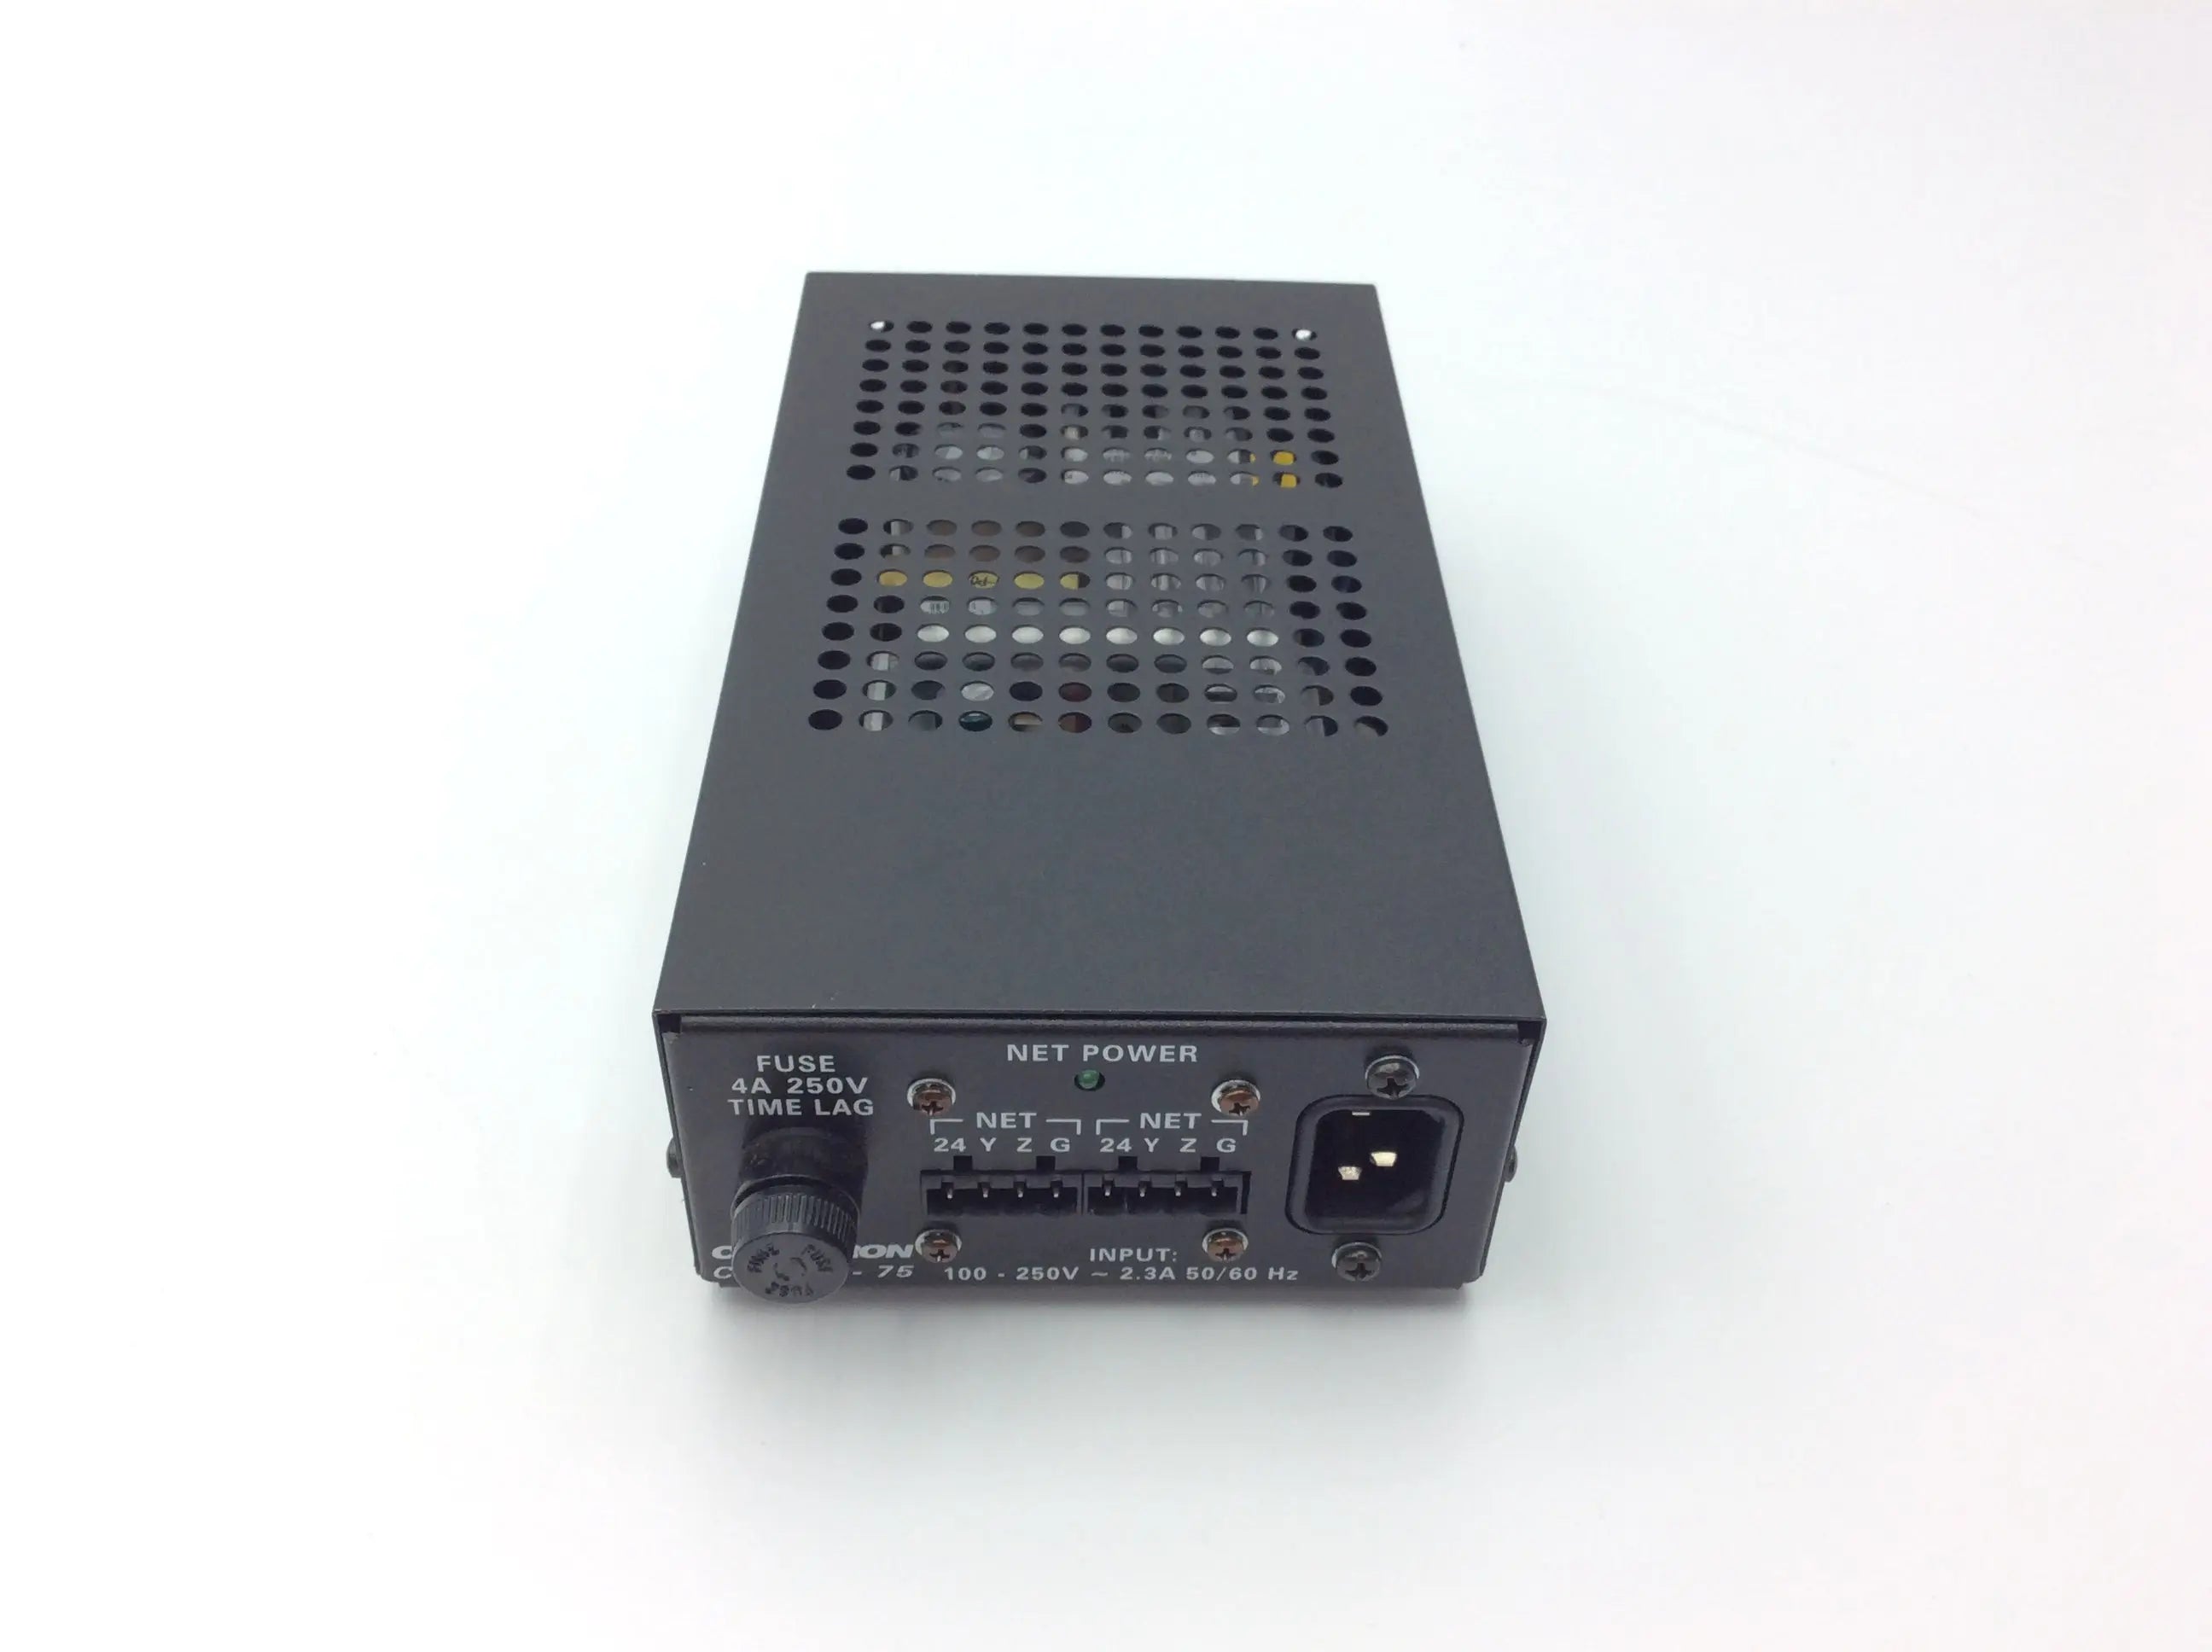 Load image into Gallery viewer, A Biomedical Service Crestron CNPWS-75 Power Supply 75.00